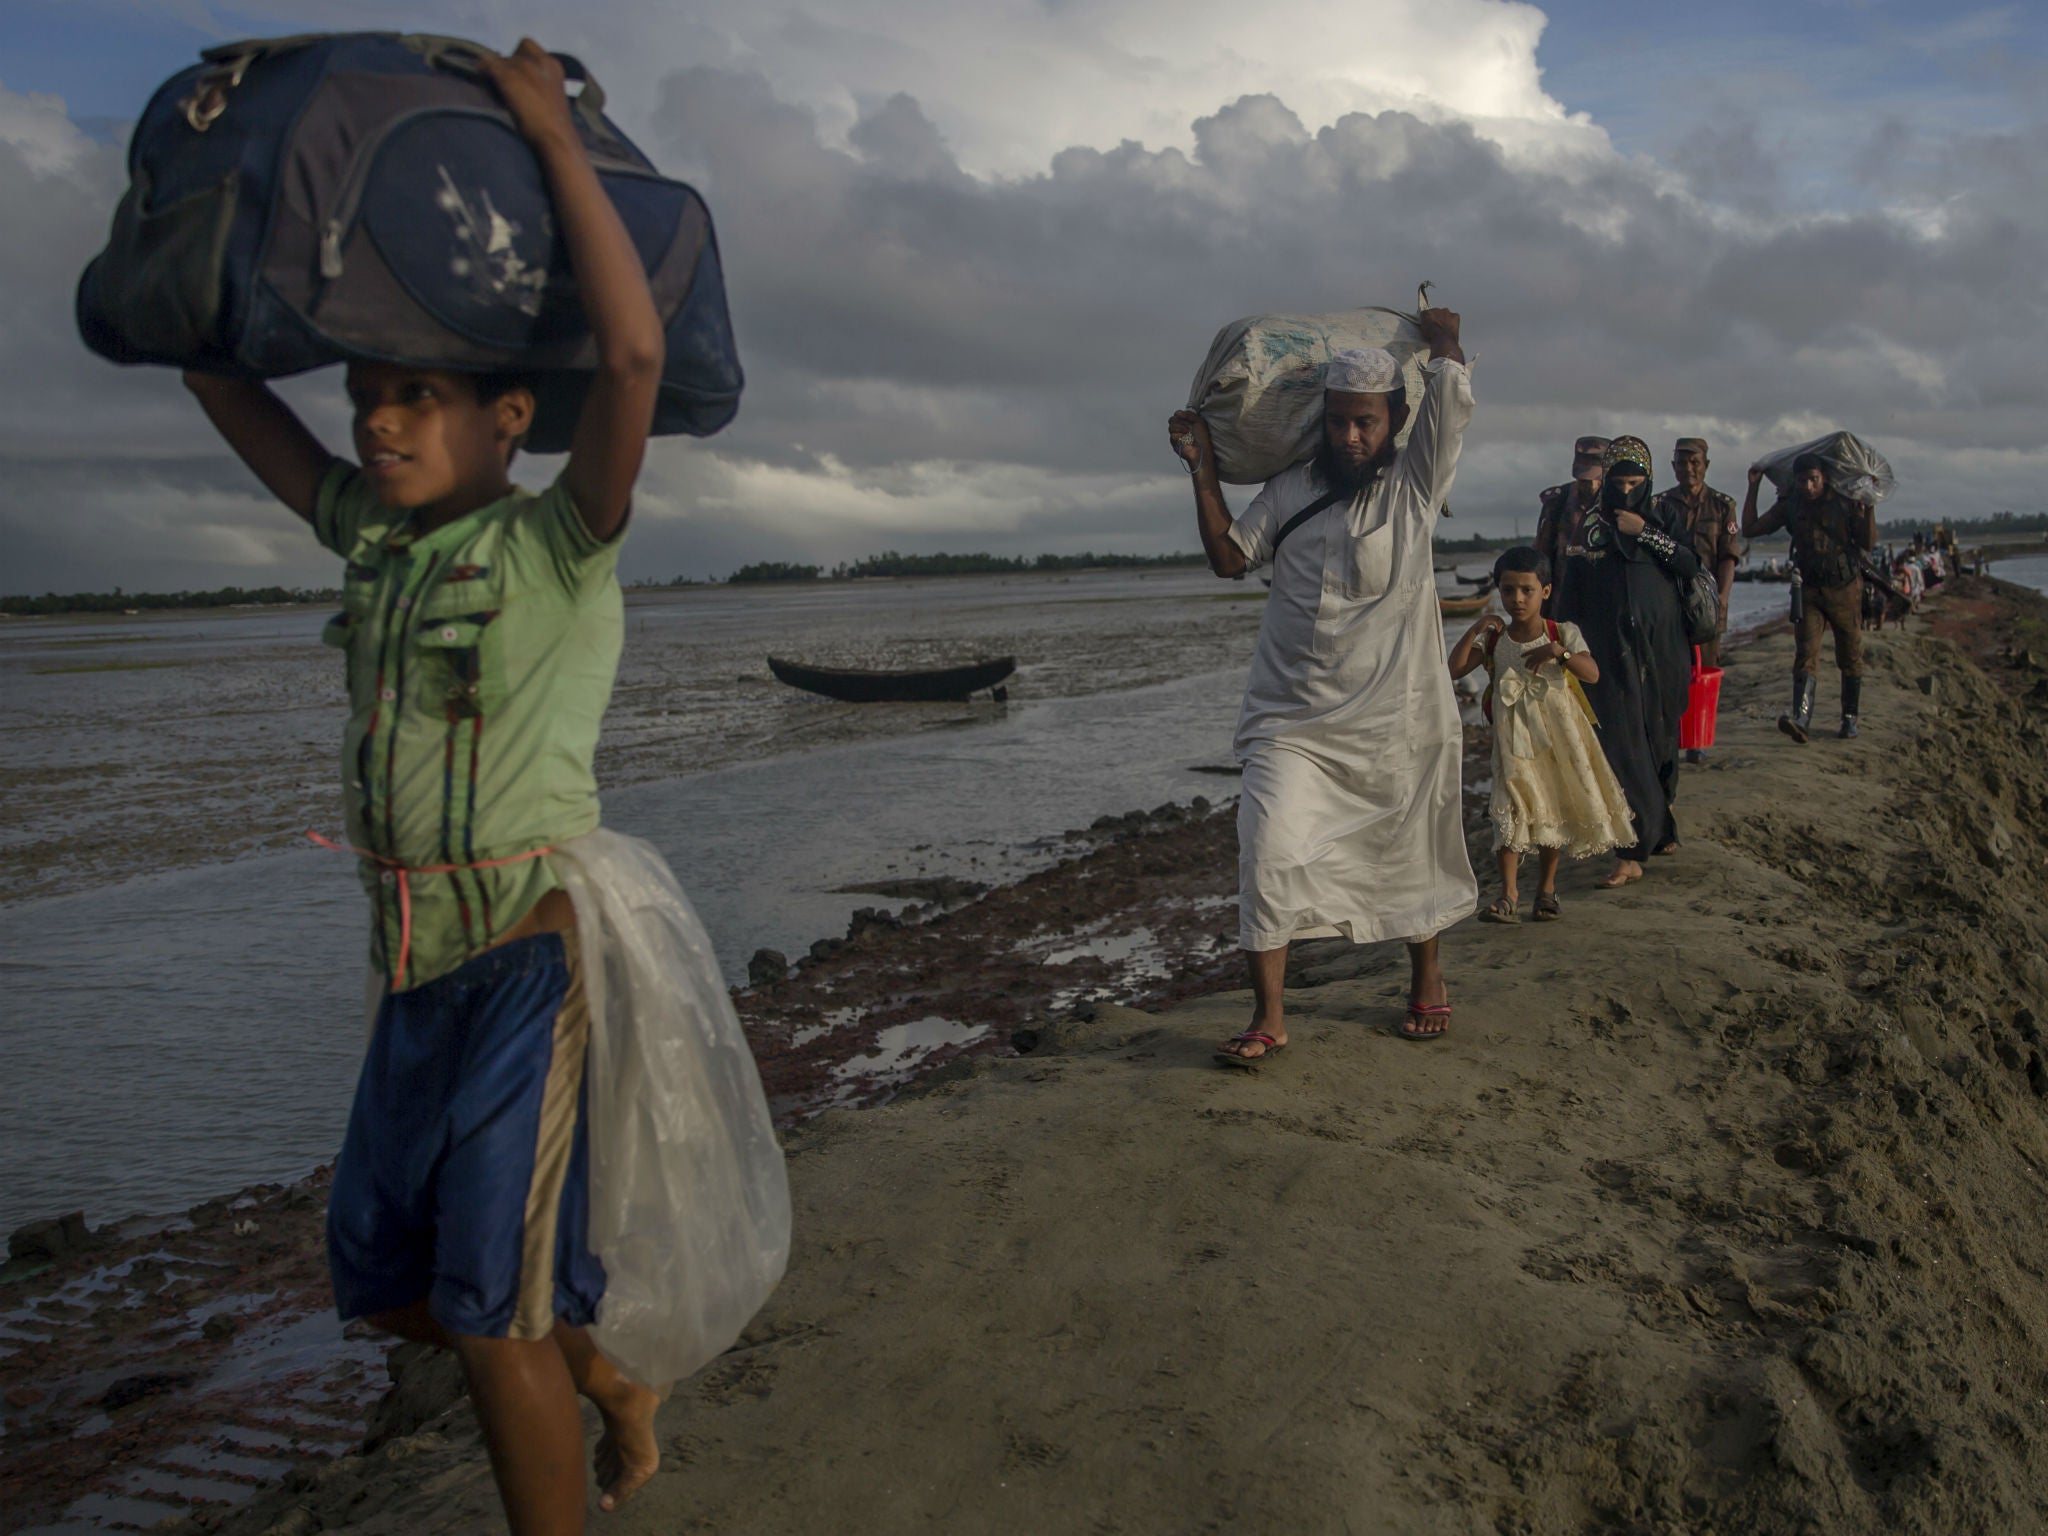 Newly-arrived Rohingya Muslims, who crossed over from Burma into Bangladesh, walk towards the nearest refugee camp at Teknaf